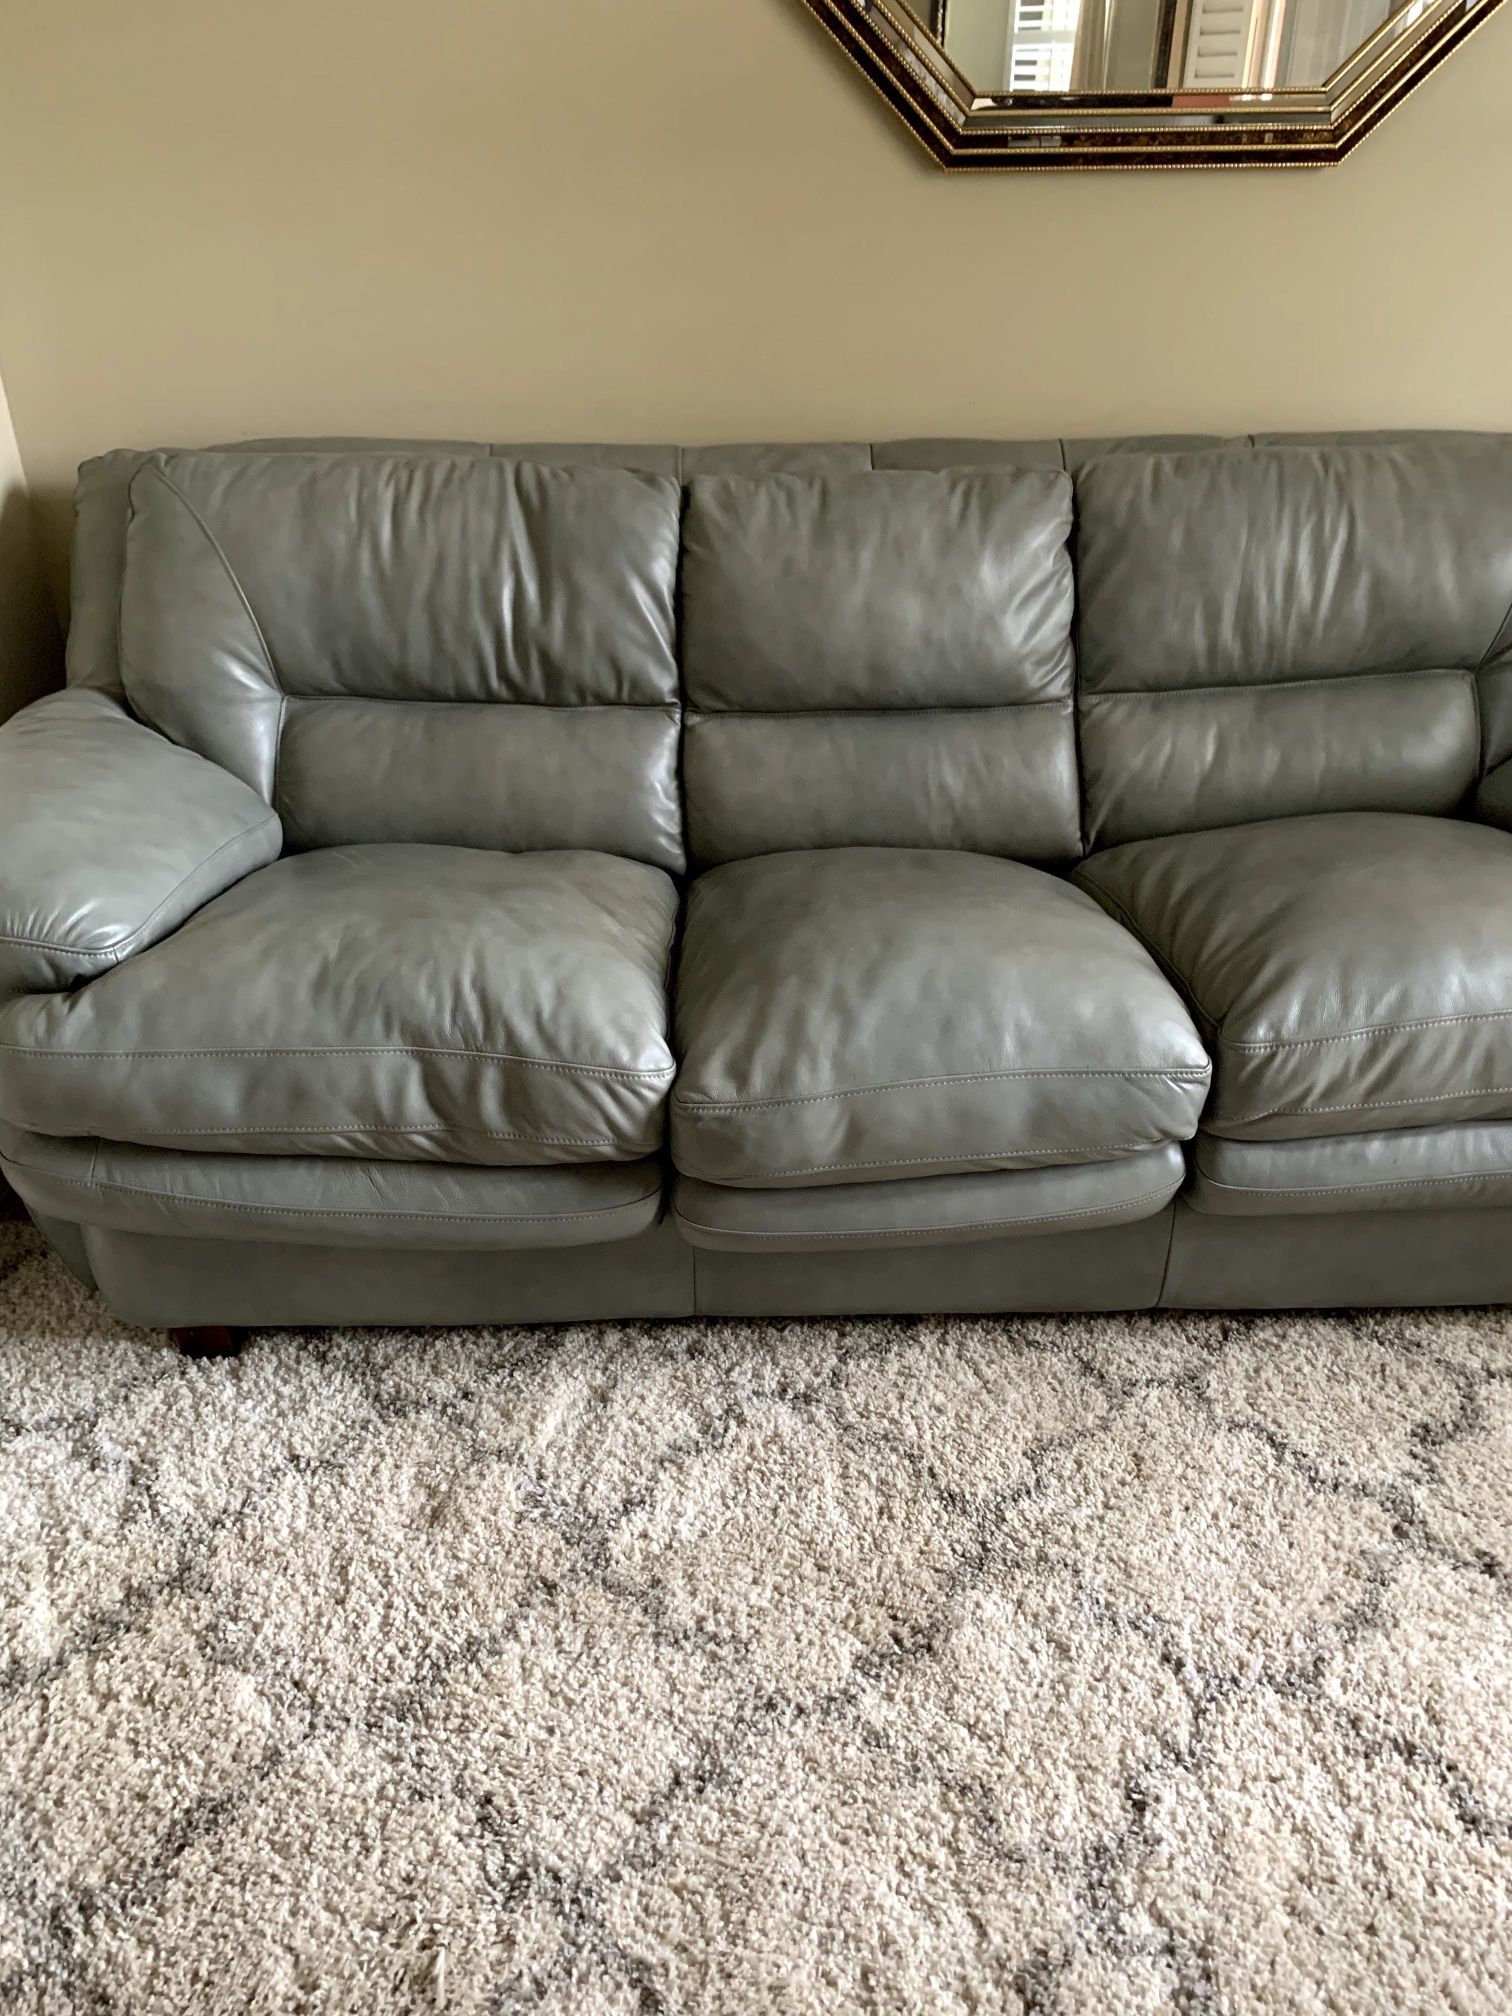 PRICE REDUCED Leather Sofa Sleeper Excellent Condition  $699.00